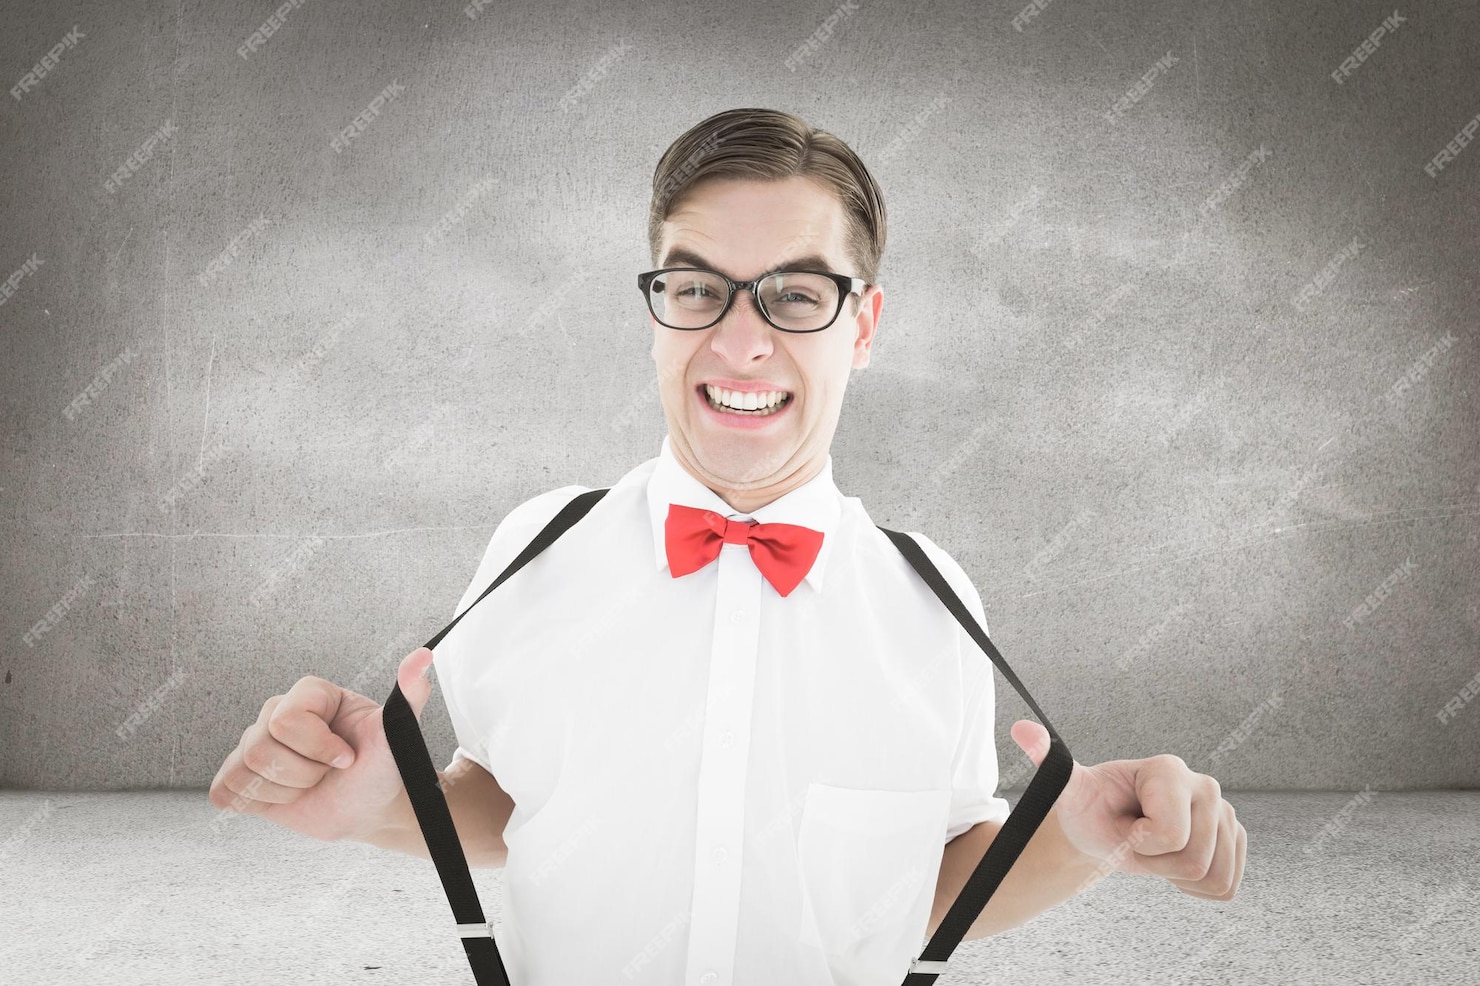 Premium Photo | Composite image of geeky hipster pulling his suspenders